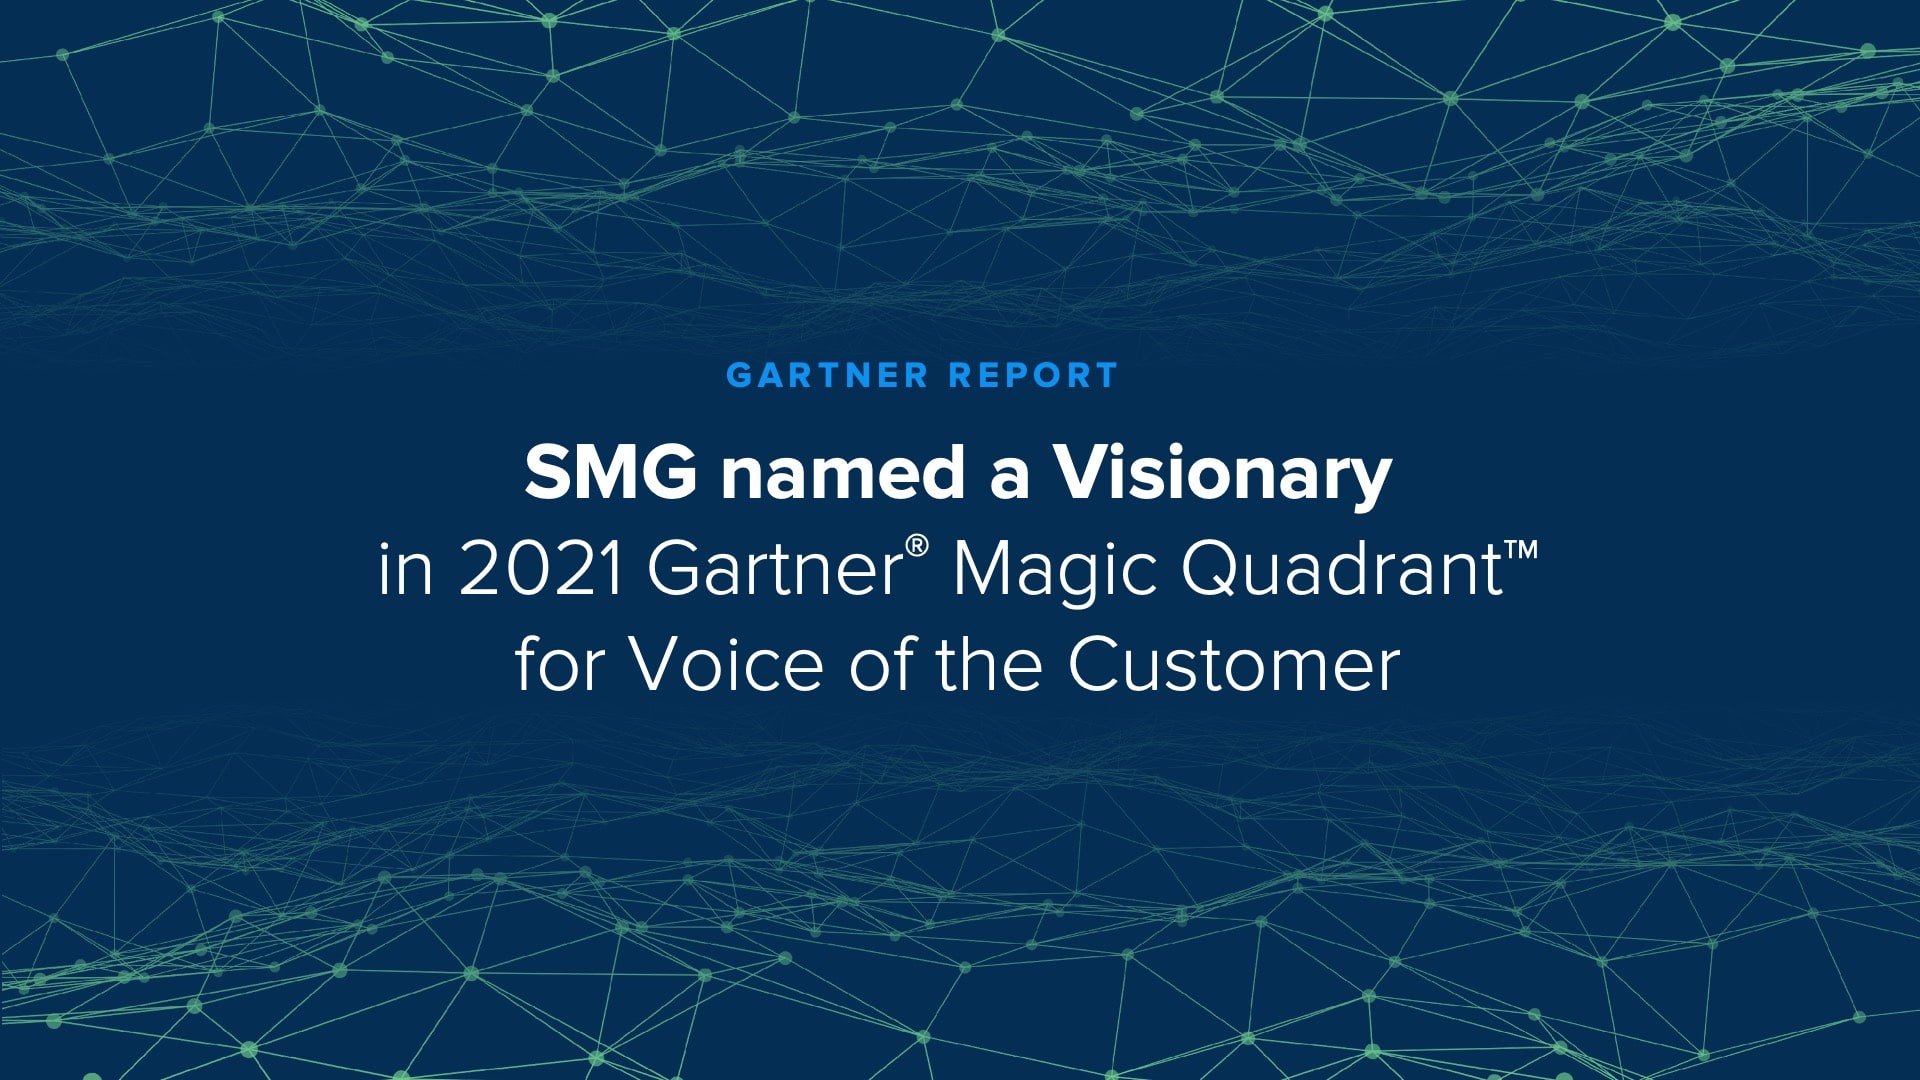 SMG named a Visionary in 2021 Gartner® Magic Quadrant™ for Voice of the Customer